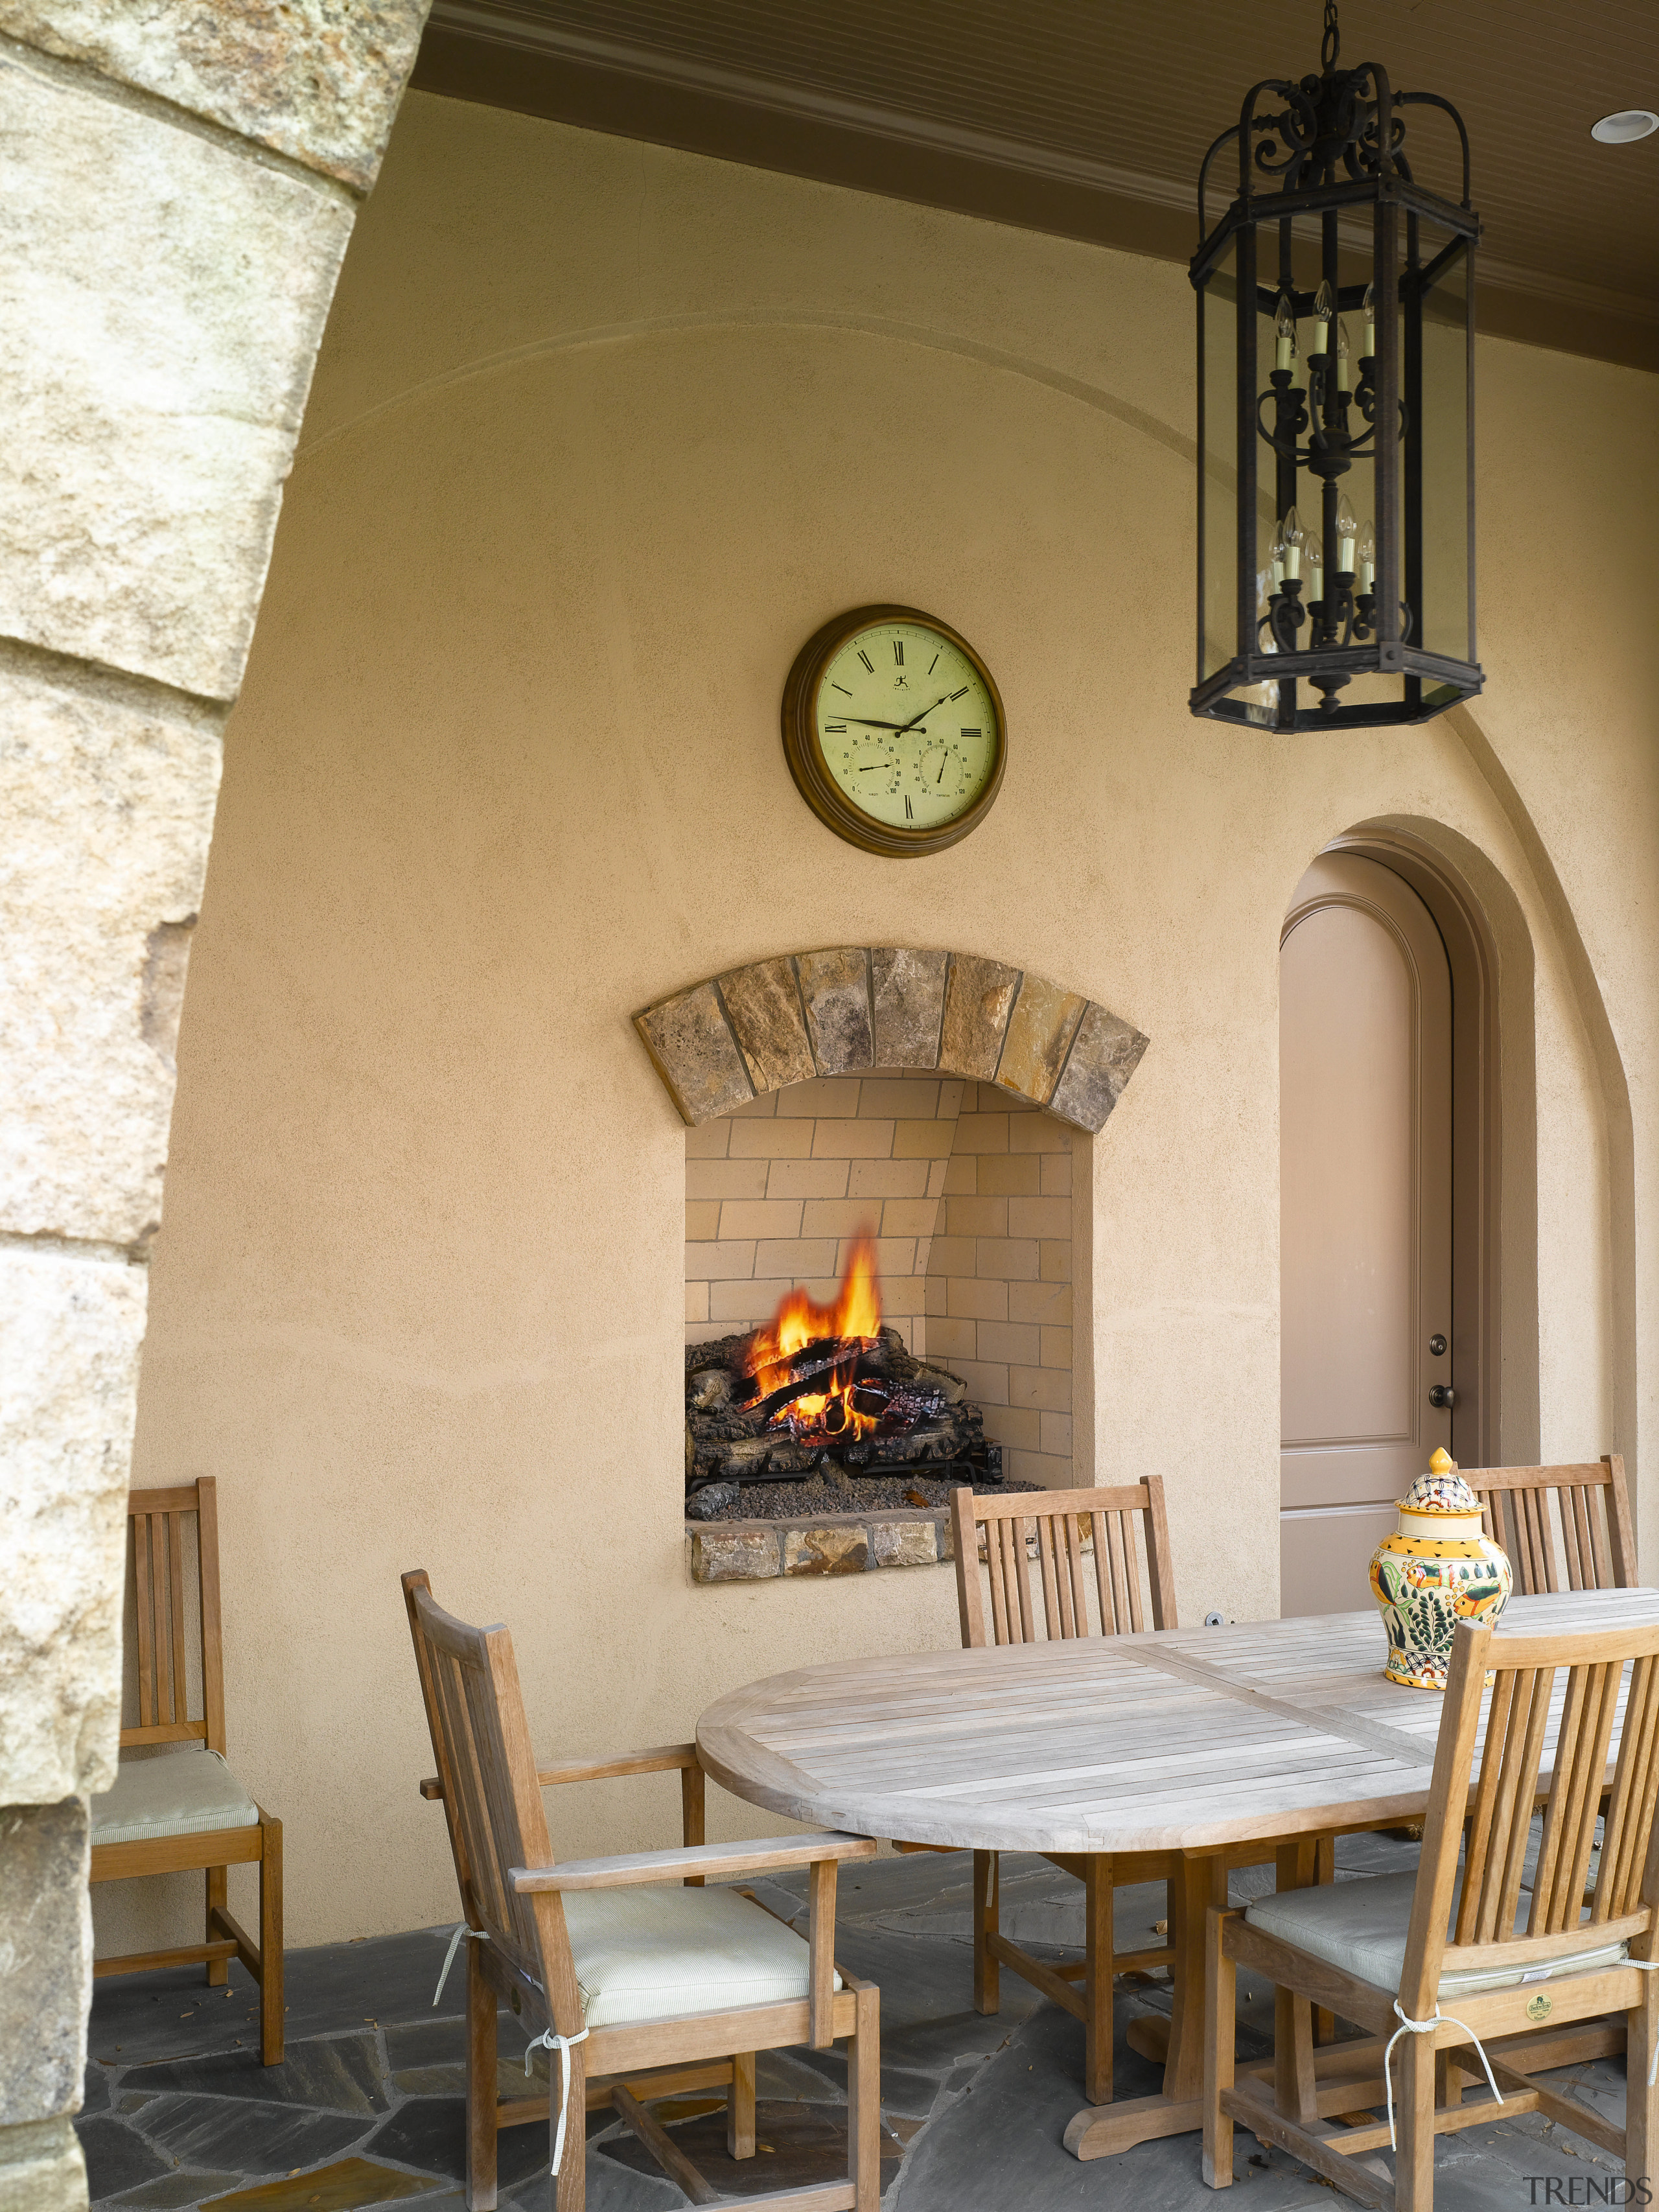 View of outdoor fireplace setting, with dining chair ceiling, fireplace, furniture, hearth, home, interior design, living room, table, wall, brown